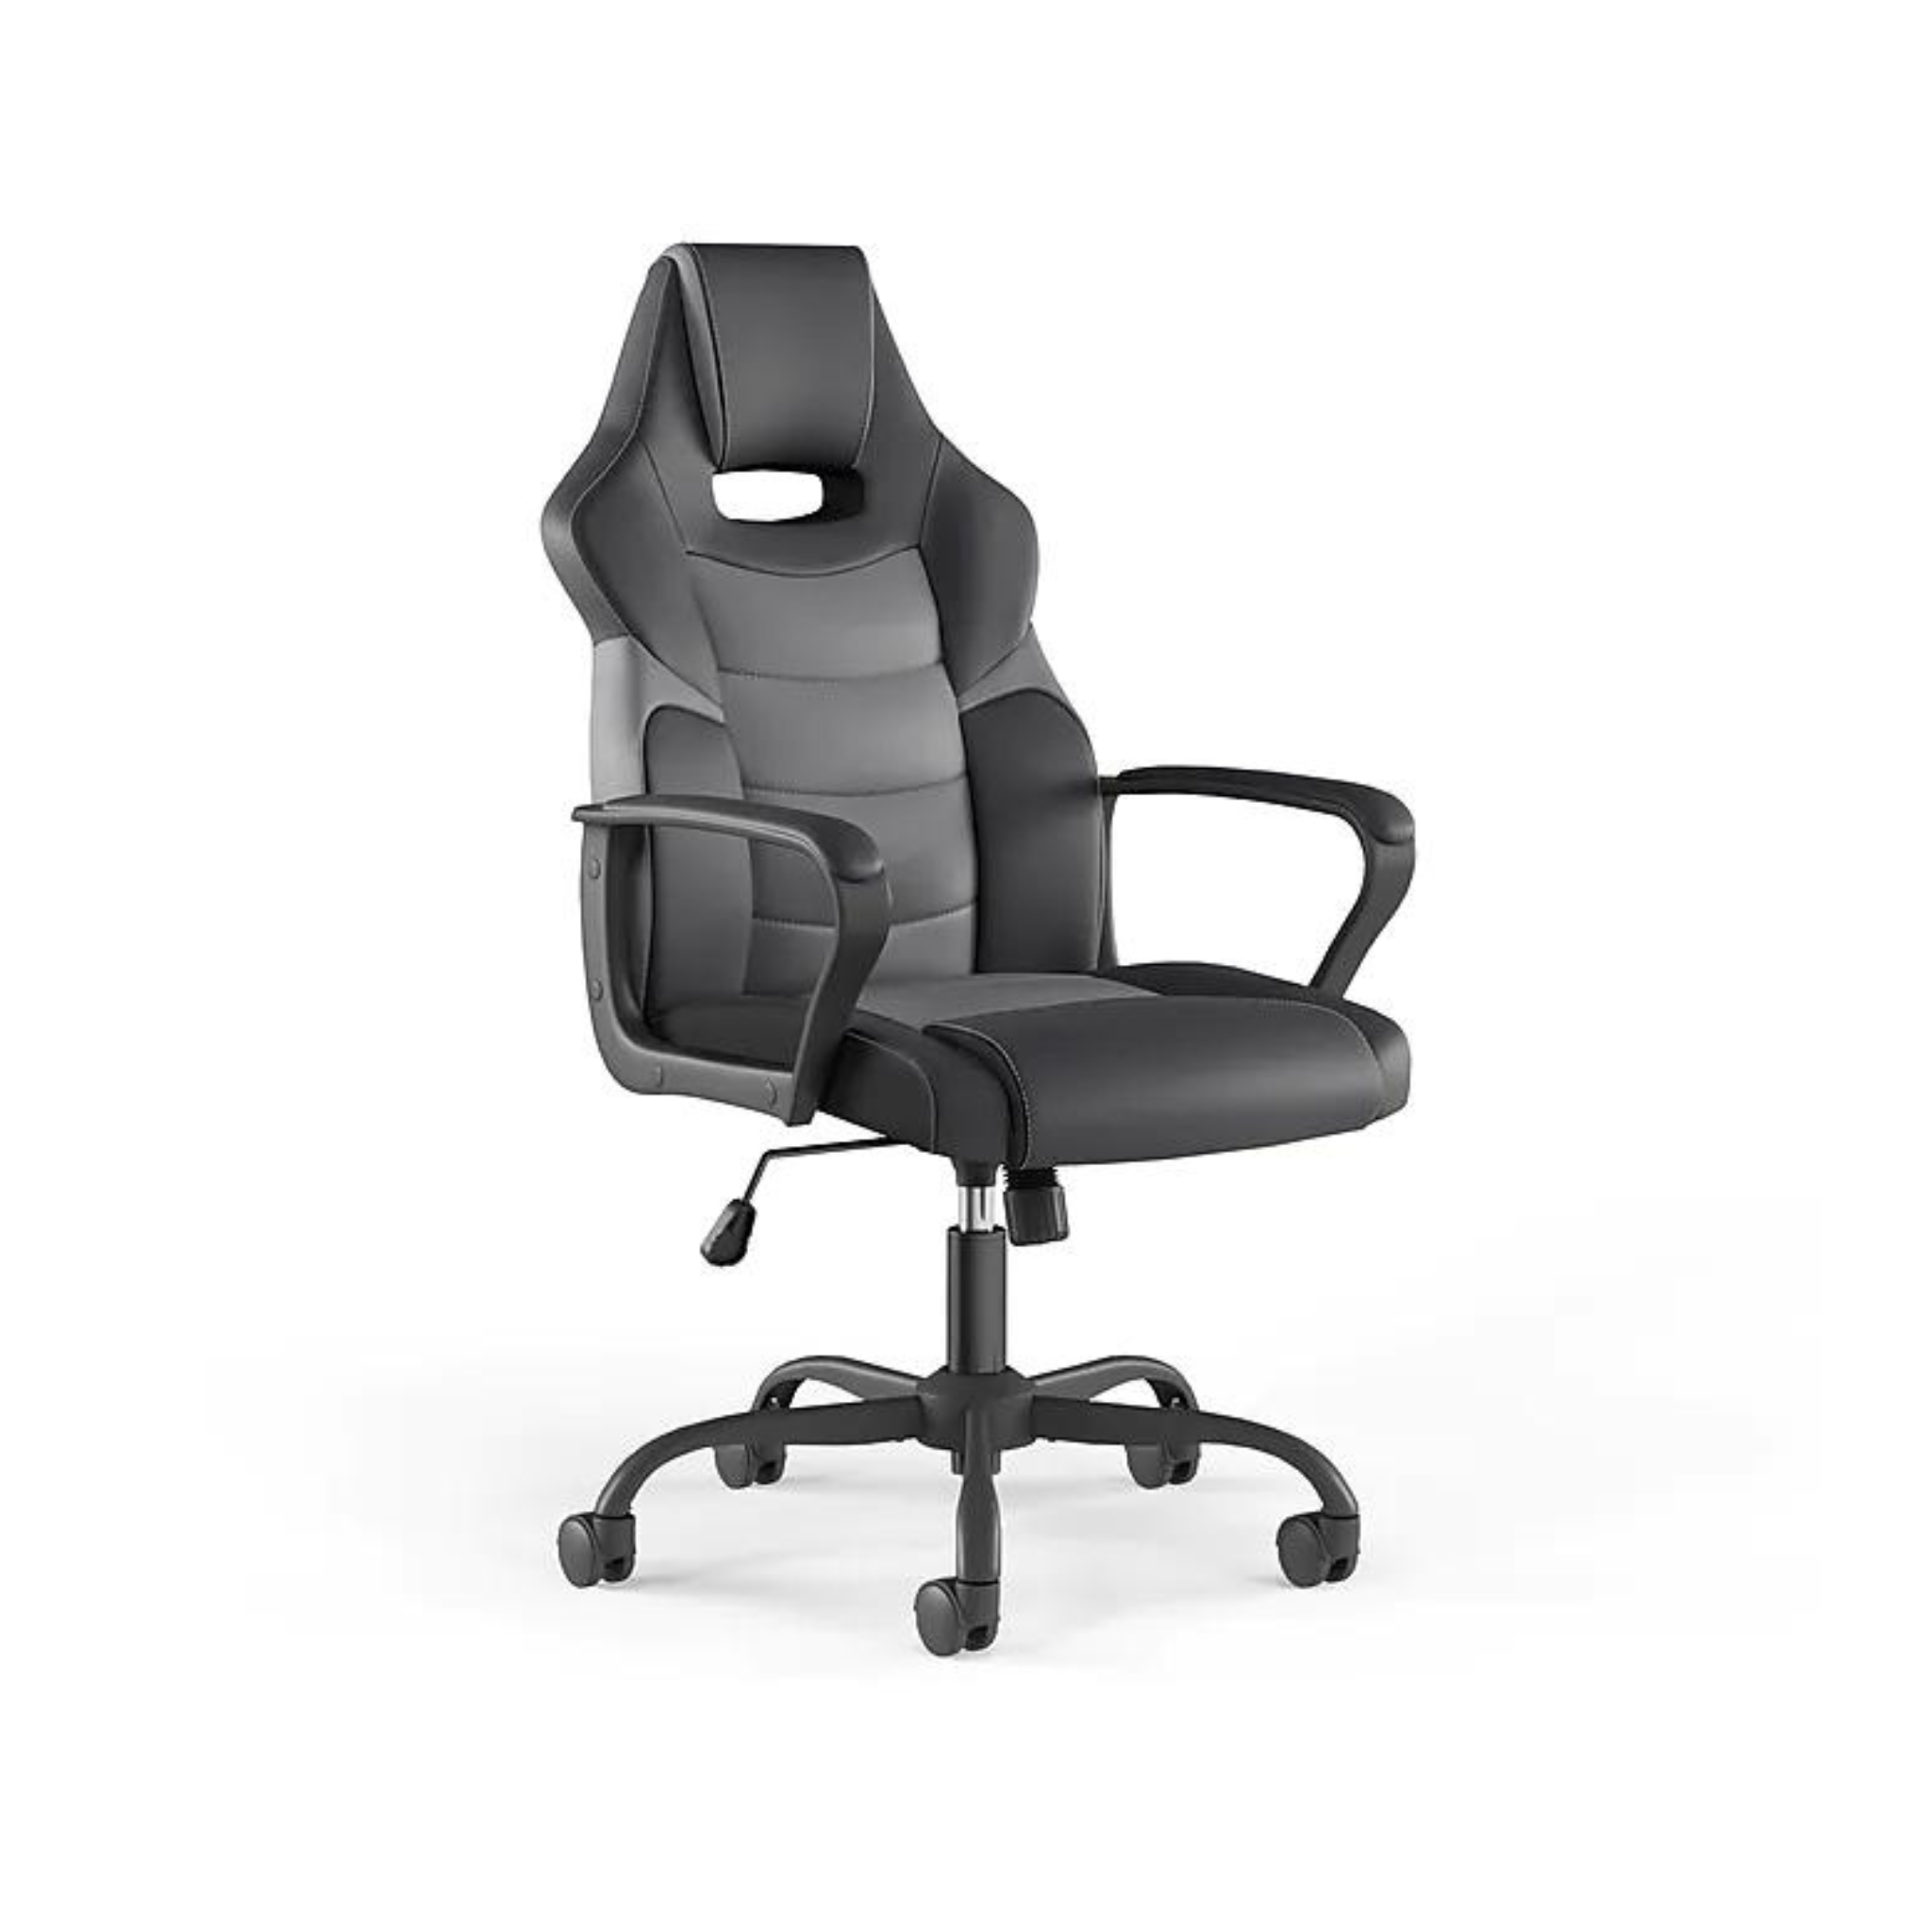 Gaming Chair And 27 Inch Monitor On Sale